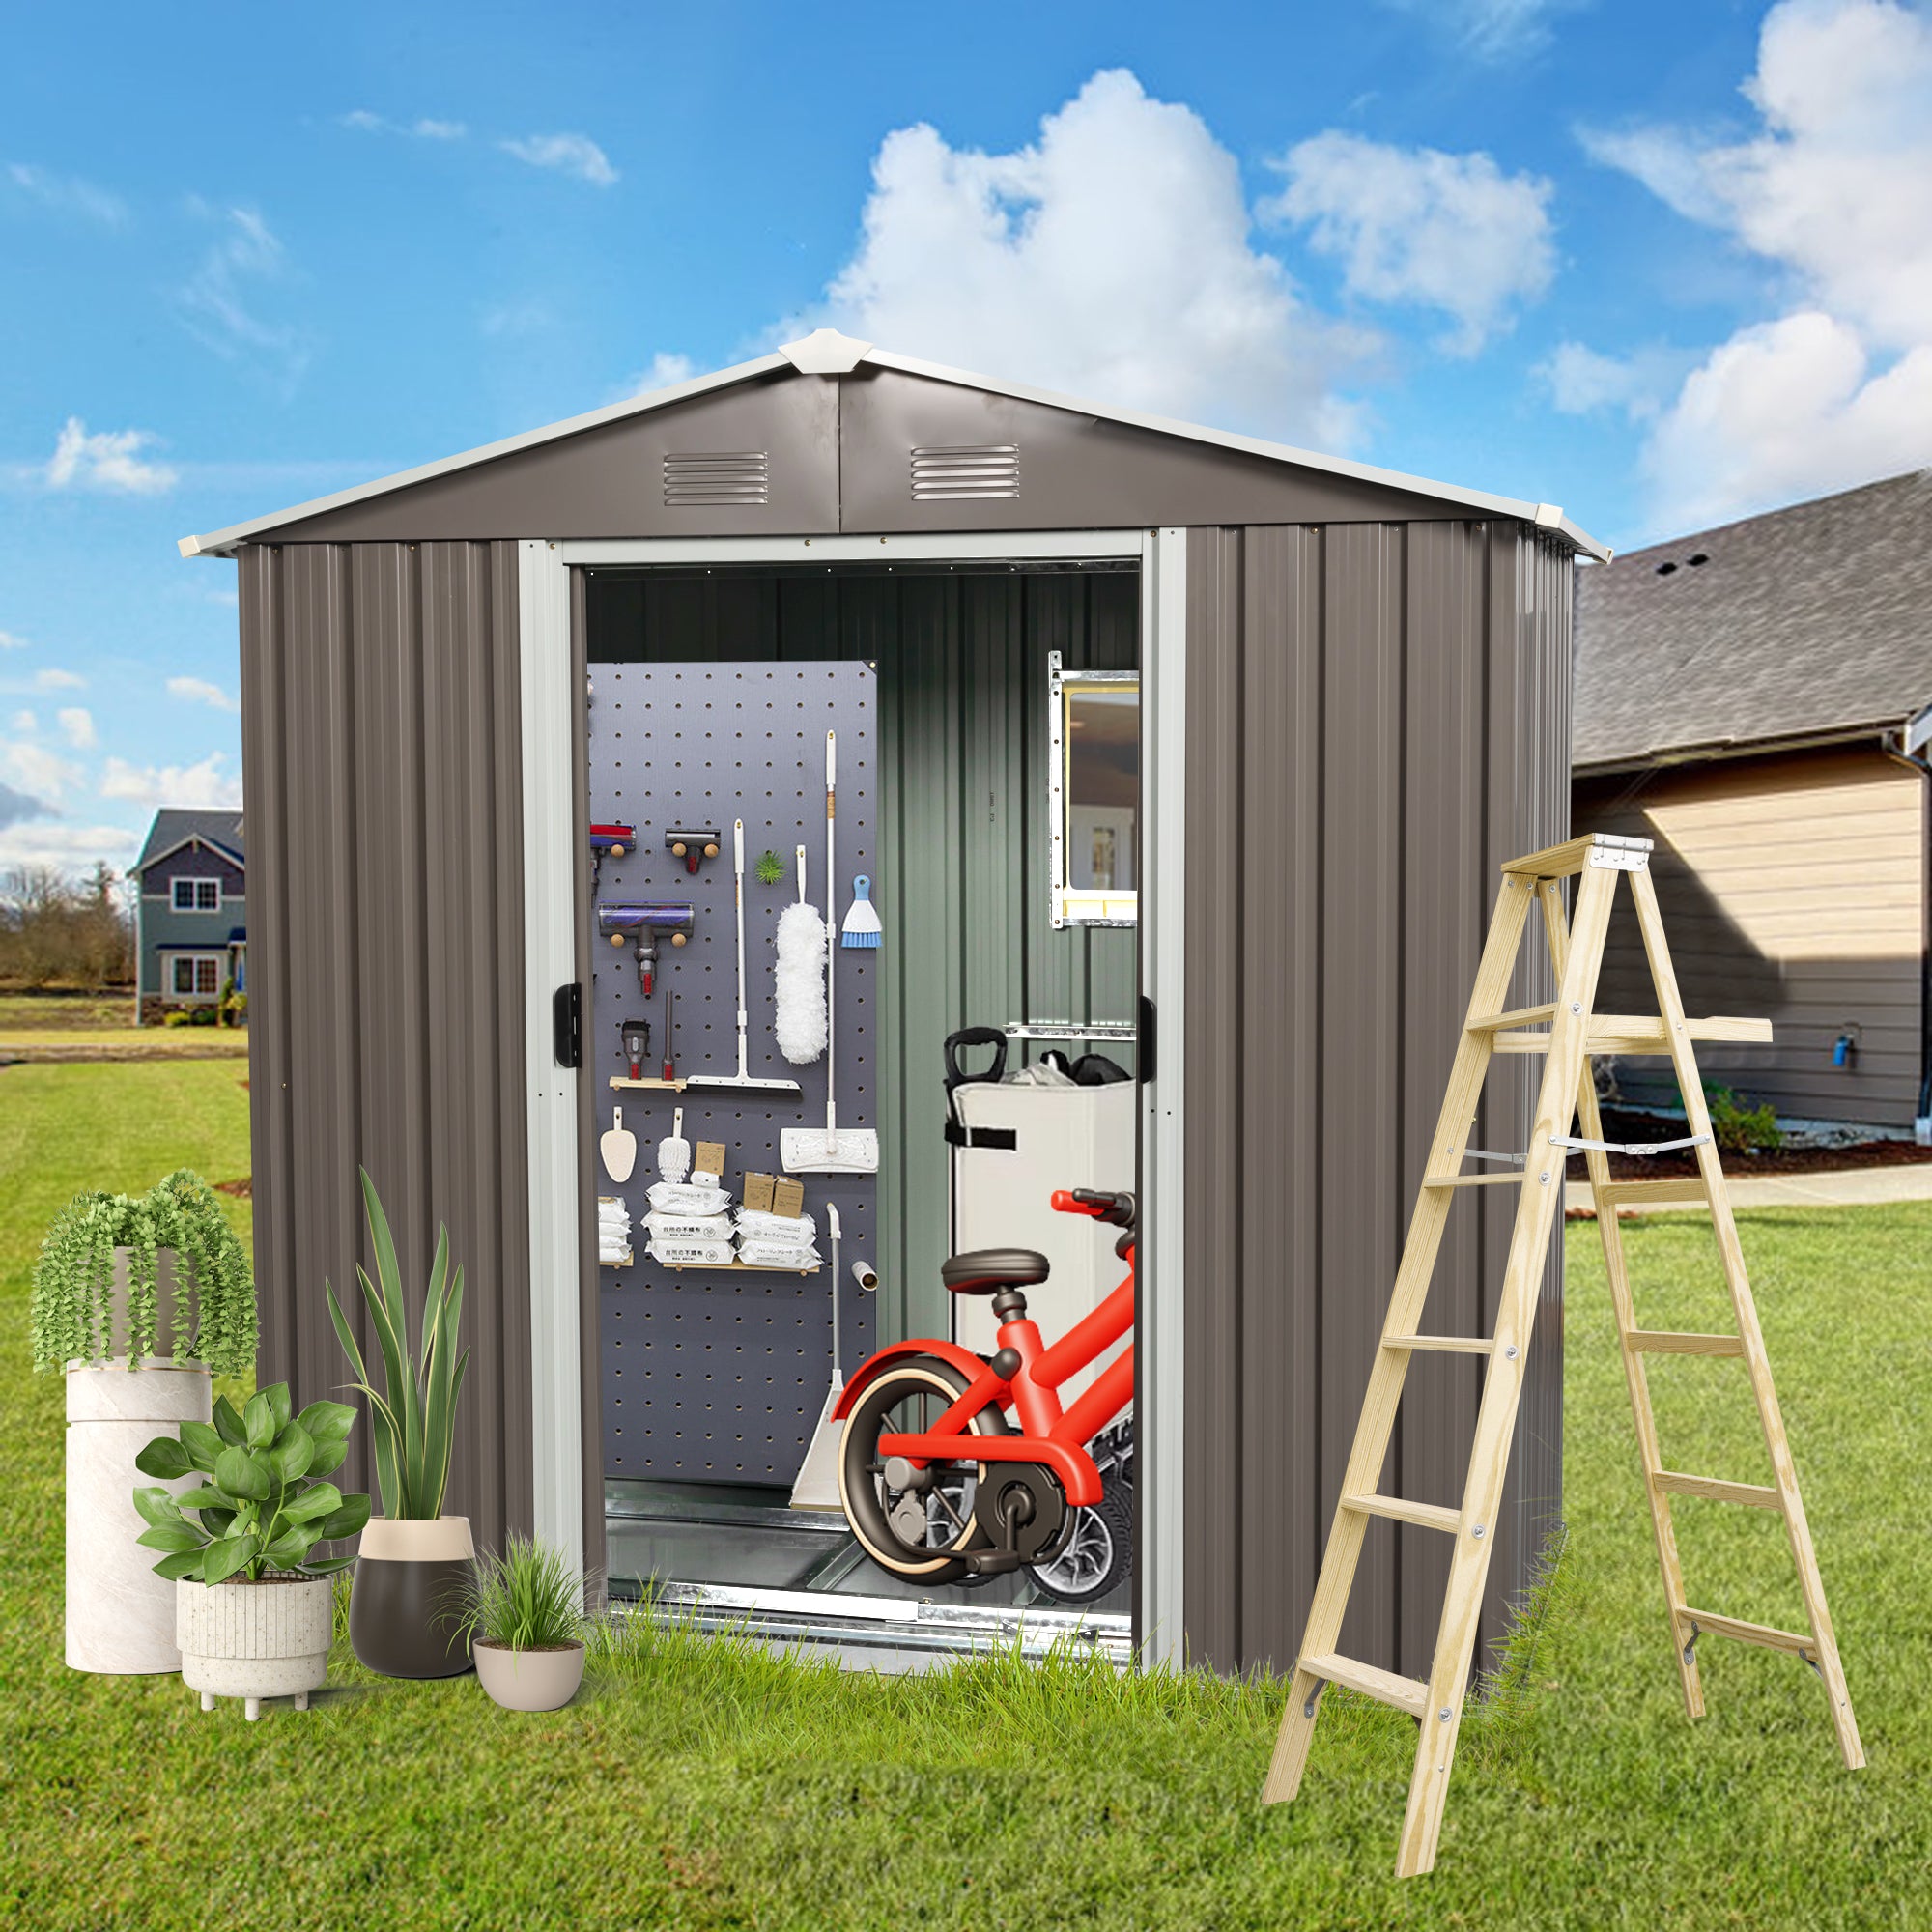 8ft x 4ft  Outdoor Metal Storage Shed with Aluminum Frame and Window- Gray